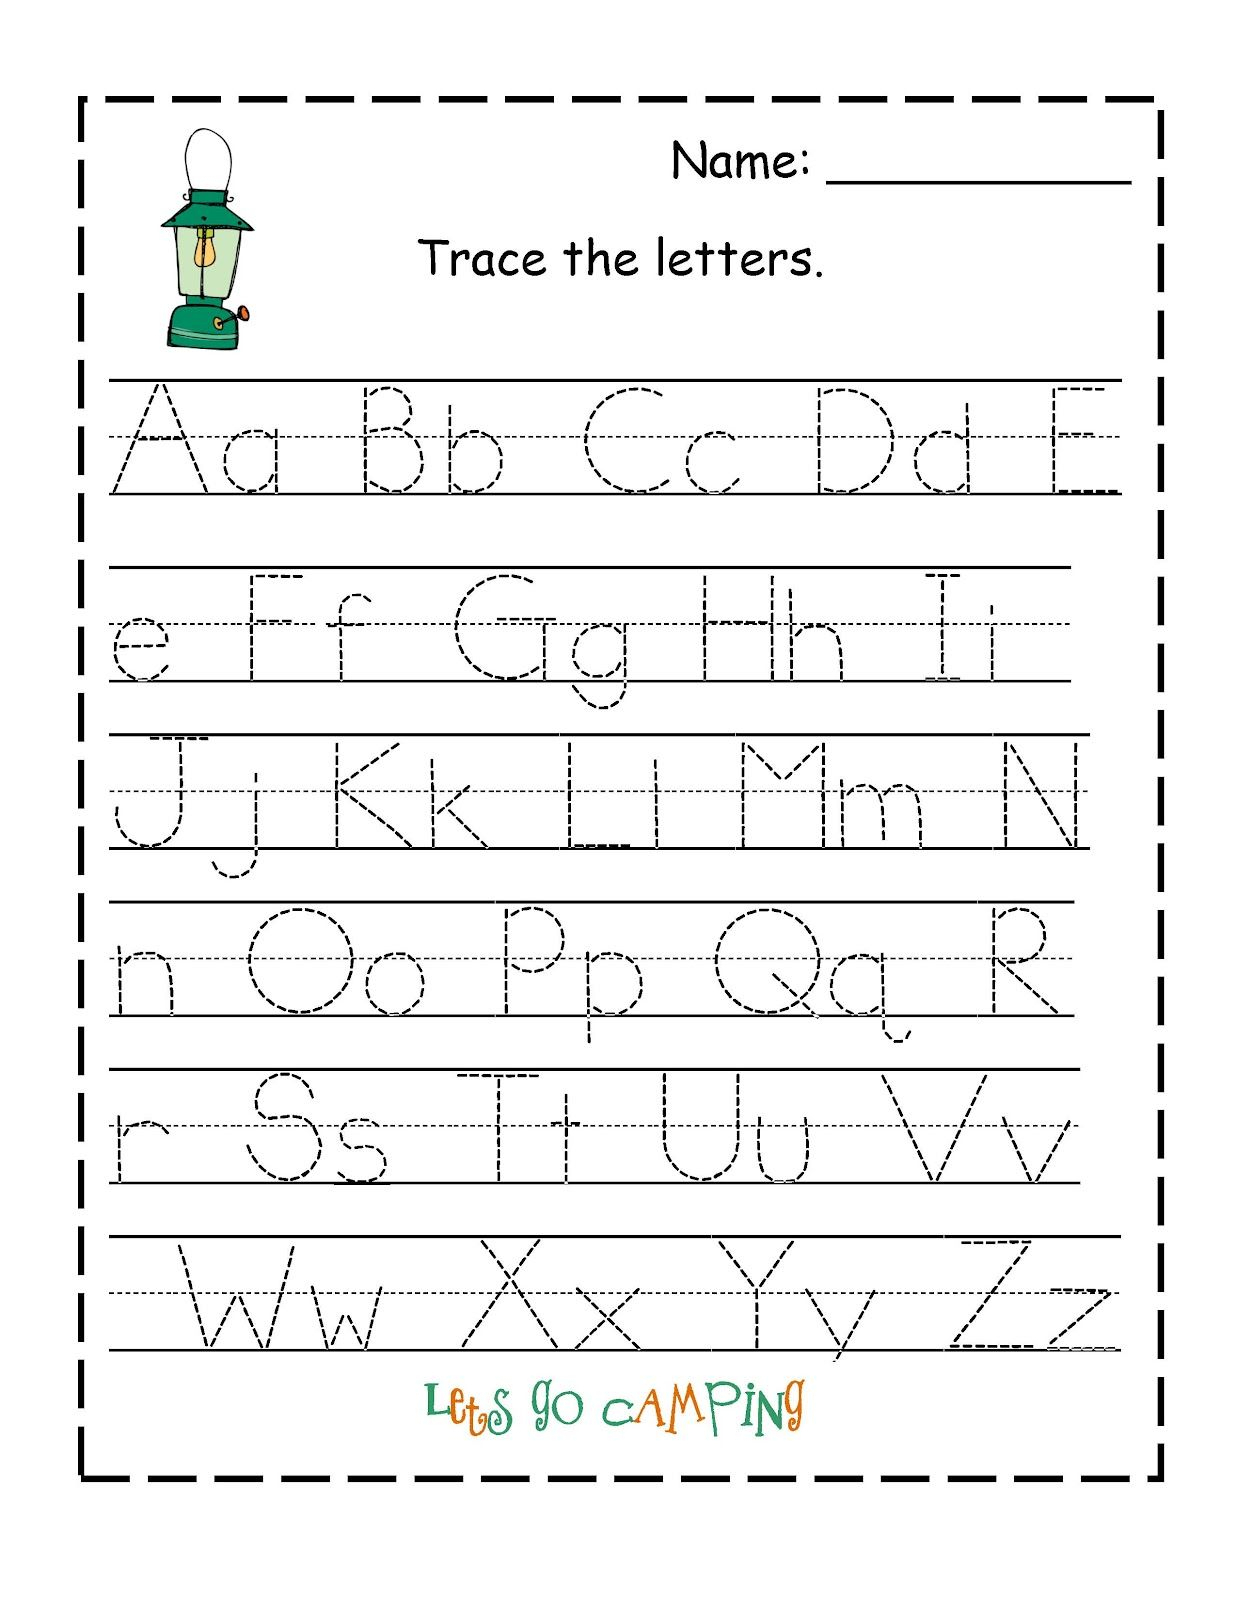 Camping+New+Template+For+A-Z (1236×1600) | Preschool with Letter Tracing 1St Grade